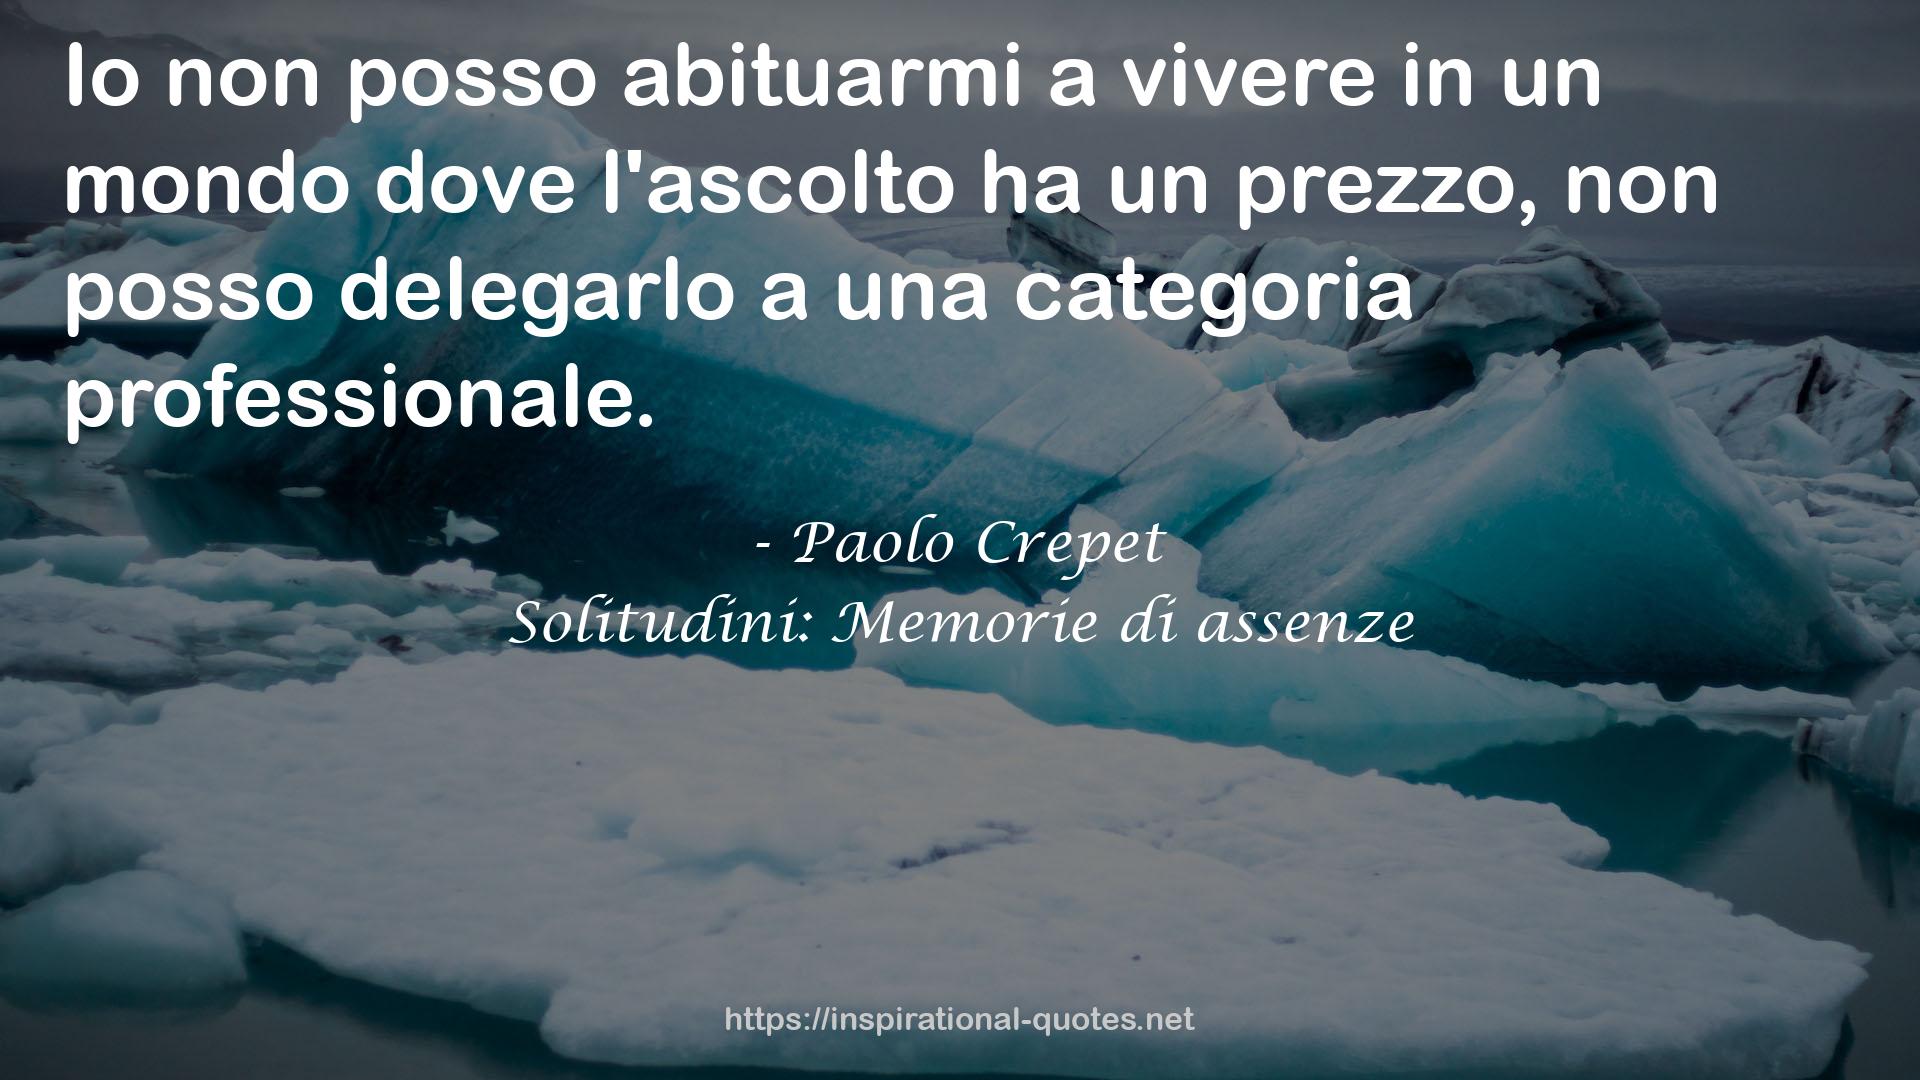 Paolo Crepet QUOTES